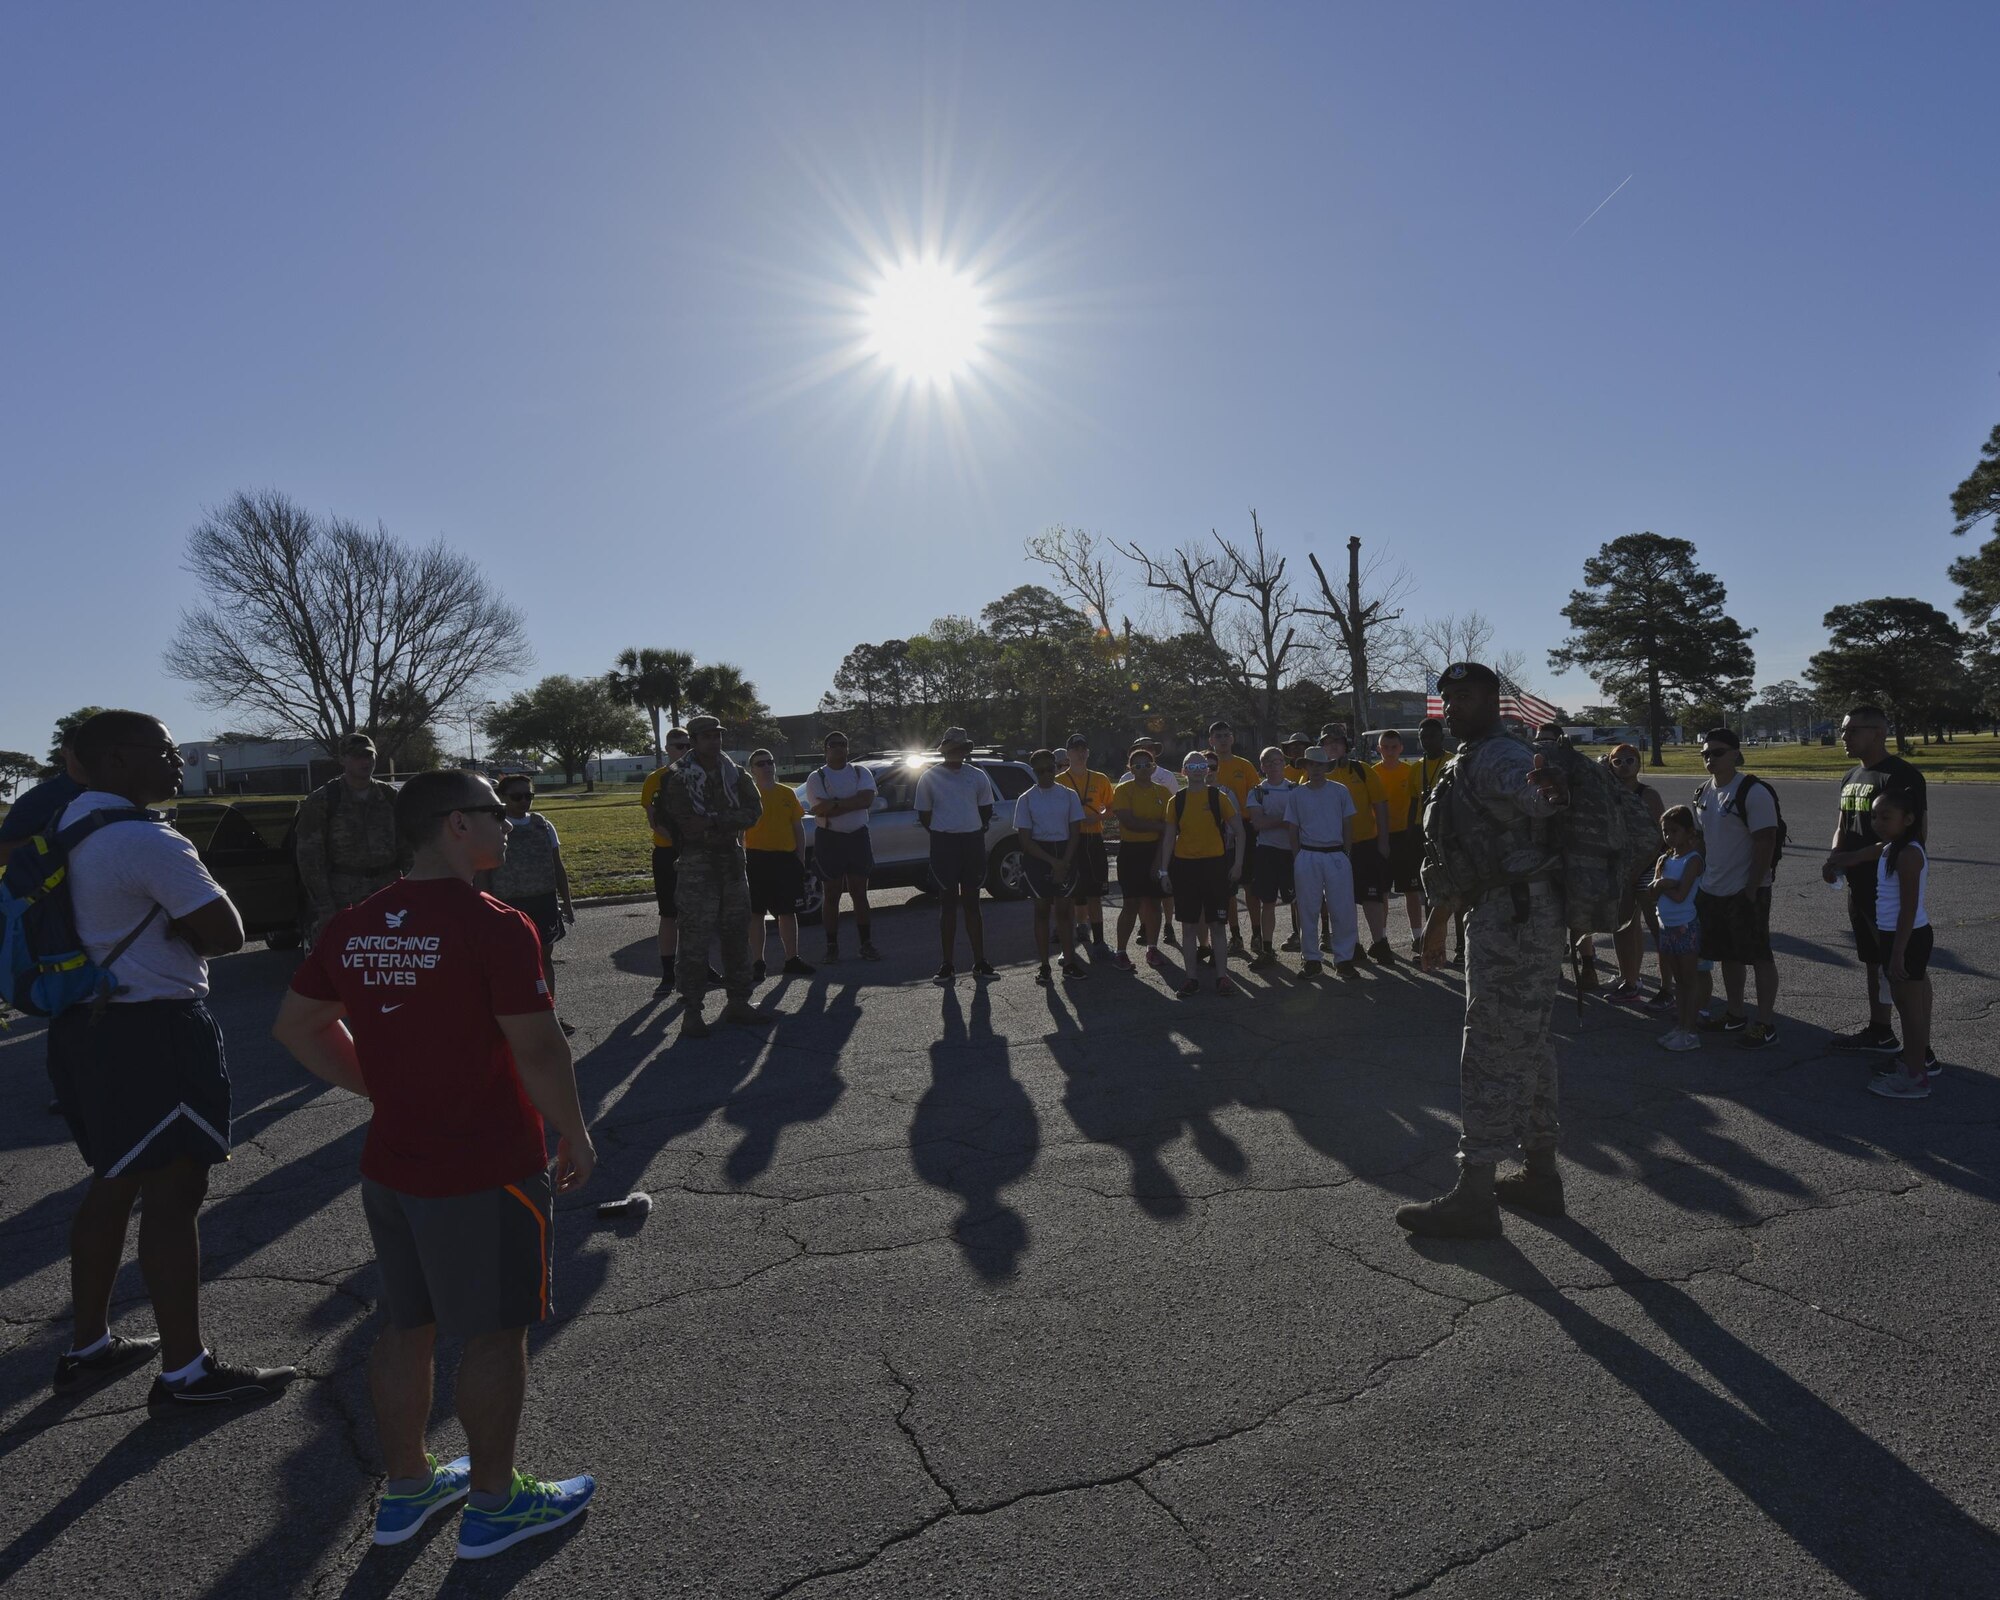 U.S. Air Force Staff Sgt. Cameron Culliver, 325th Security Forces Squadron fleet management NCO in charge, gives members of the Rutherford High School Junior Reserve Officer Training Corps and volunteers of Bataan Death Memorial March instructions for the event path at Tyndall Air Force Base, Fla., March 31, 2017. Rutherford High School JROTC cadets and active duty military members came together to honor the fallen and surviving members of the 1942 Bataan Death March that claimed thousands of lives. (U.S. Air Force photo by Senior Airman Solomon Cook/Released)